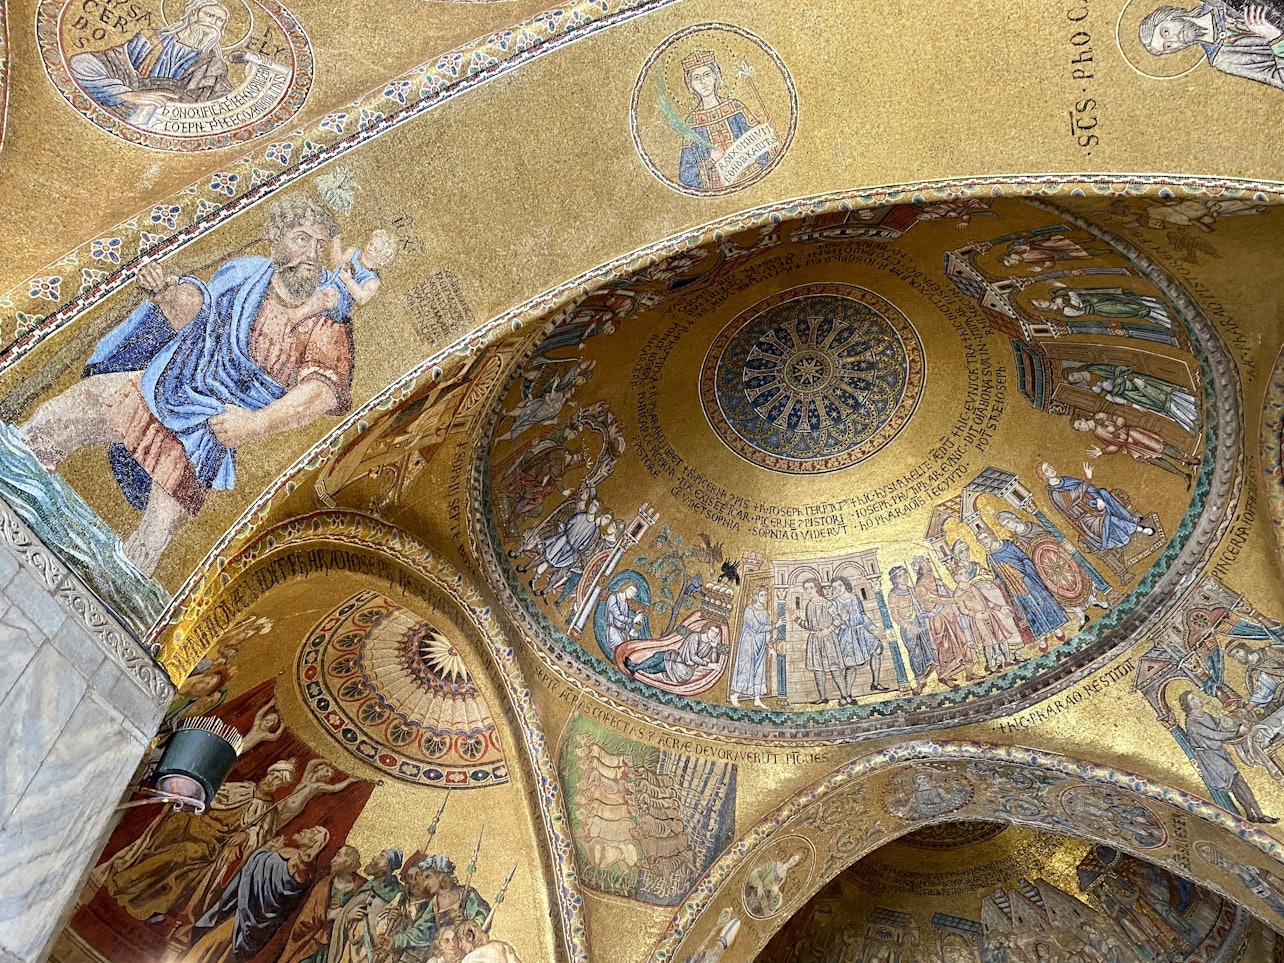 St. Mark’s Basilica: Skip The Line Entry Ticket with Terrace + Pala D’Oro Access